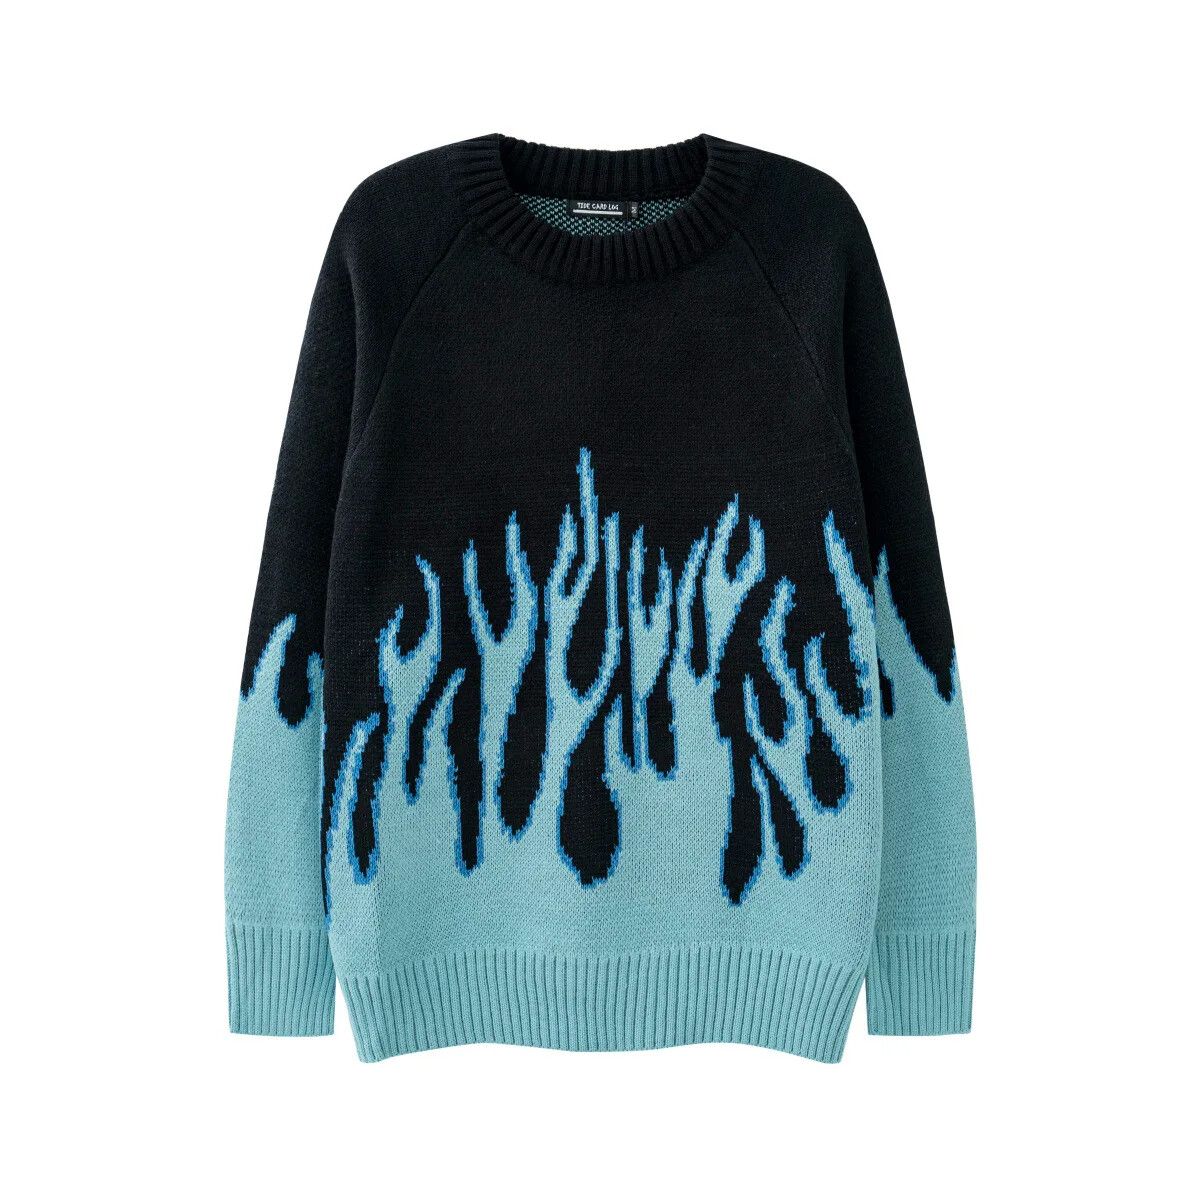 Vintage Y2k Fire Flame Knitted Oversized Sweater | Grailed